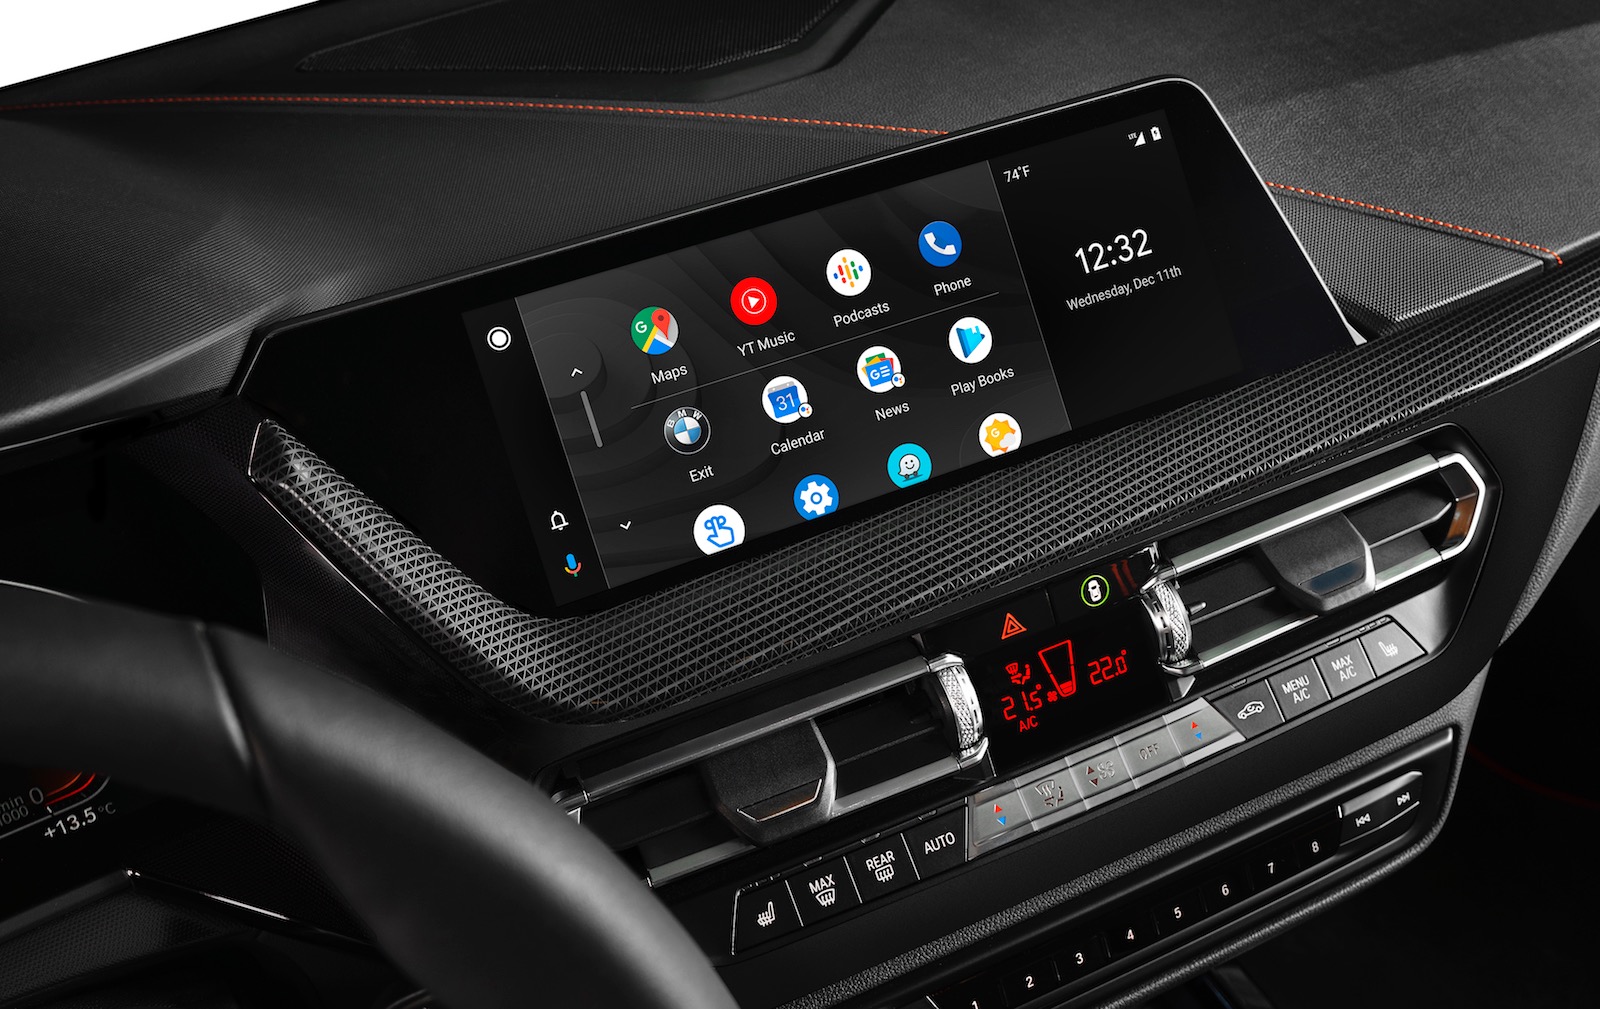 BMW adding Android Auto to its vehicles next year, finally